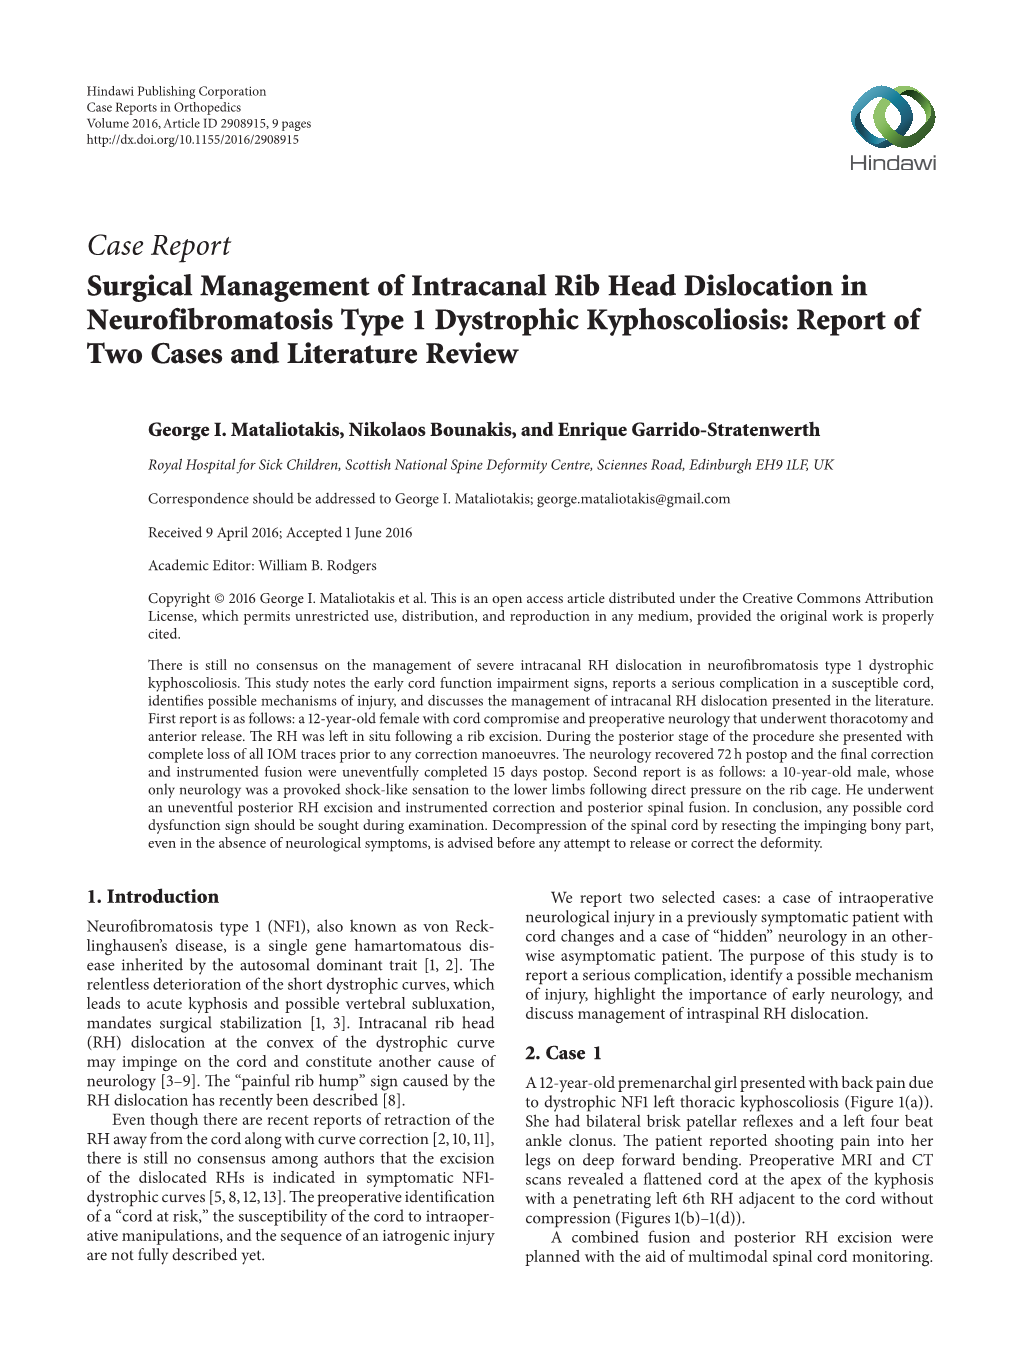 Surgical Management of Intracanal Rib Head Dislocation in Neurofibromatosis Type 1 Dystrophic Kyphoscoliosis: Report of Two Cases and Literature Review